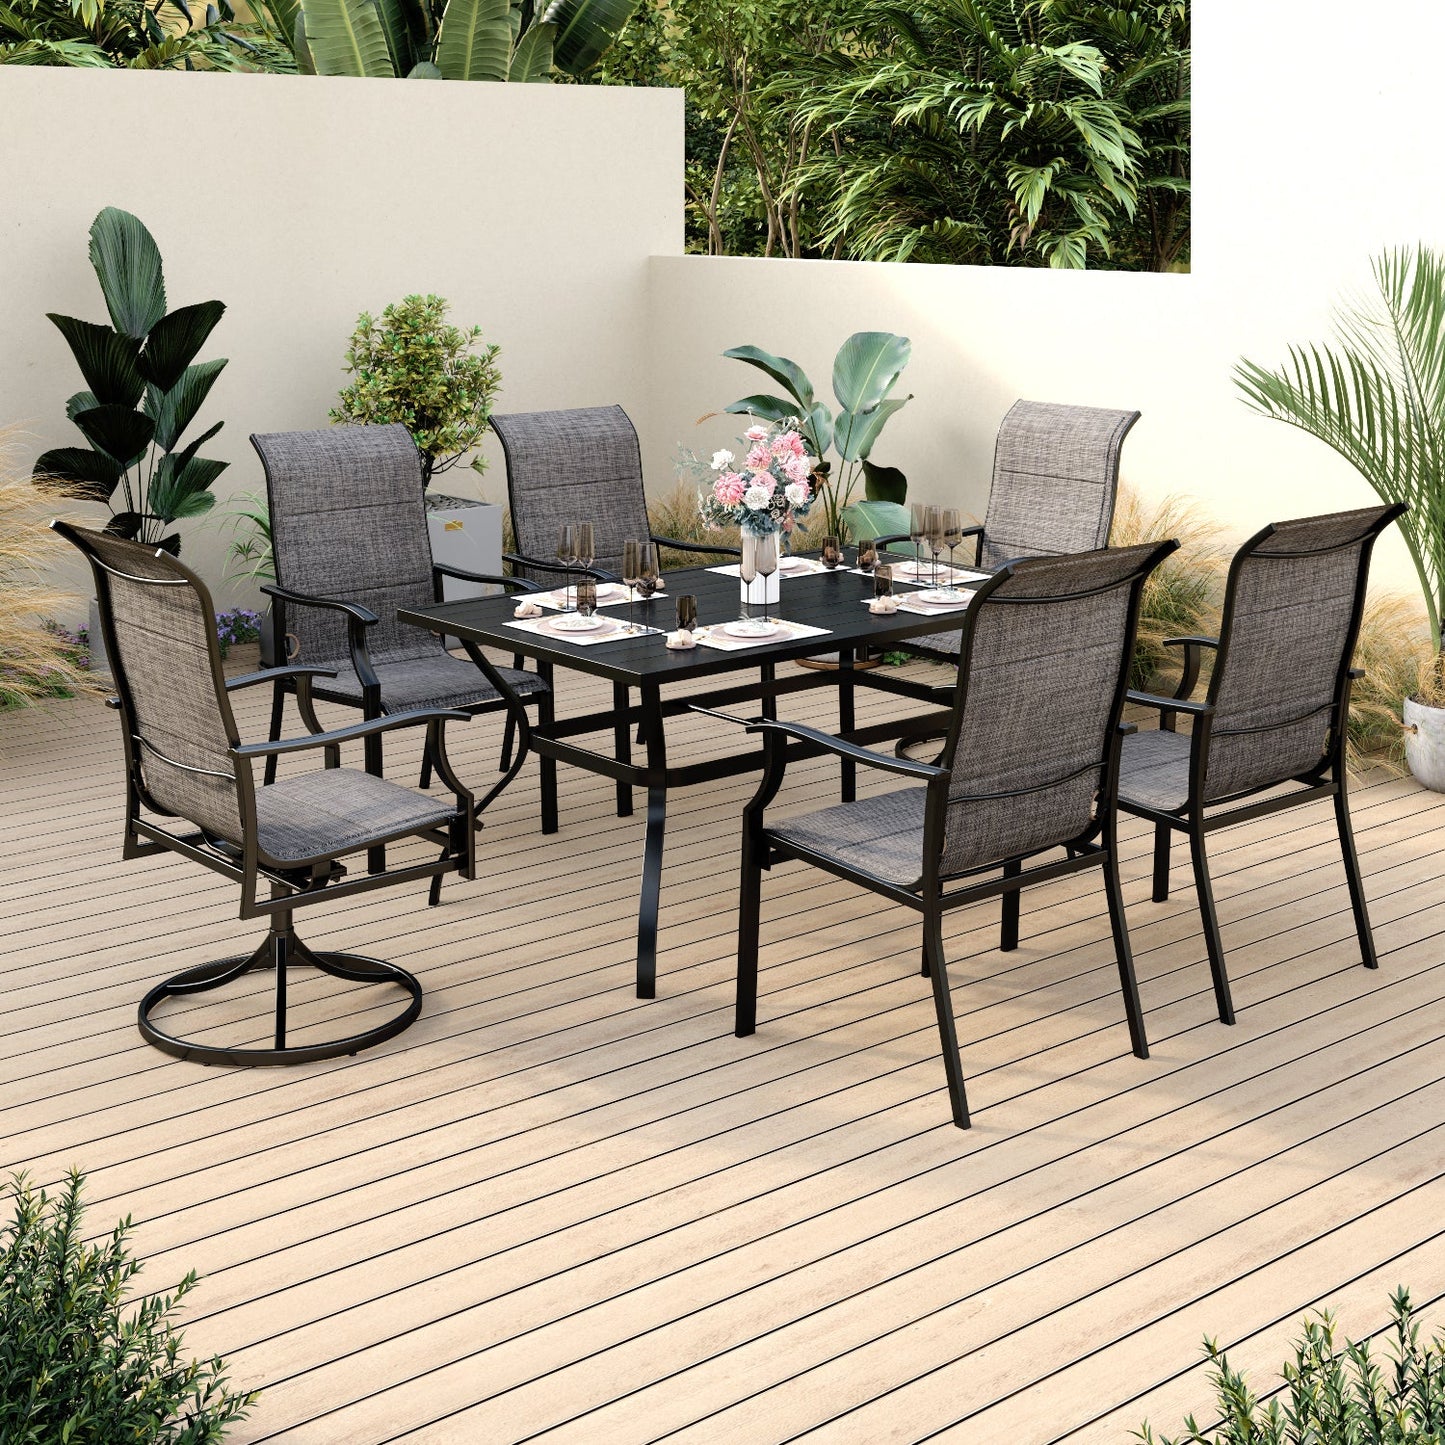 Sophia & William 7 Pieces Outdoor Patio Dining Set Textilene Patio Dining Chairs and Metal Dining Table